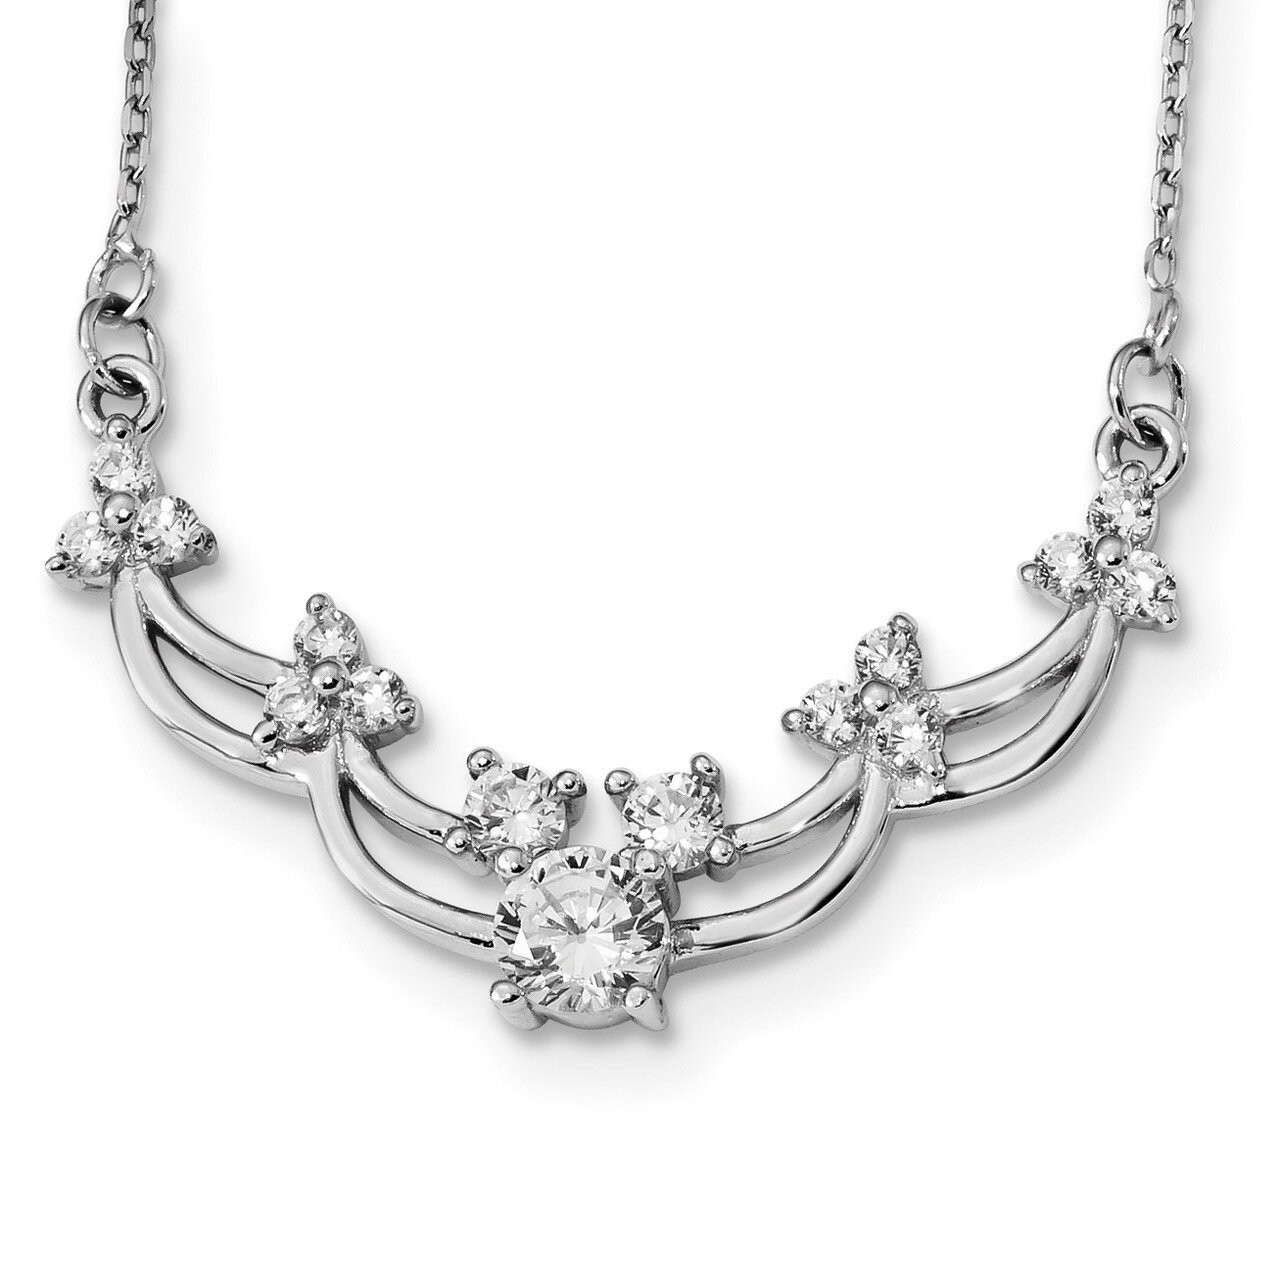 CZ Diamond 15.5 inch with 2 inch ext. Necklace 15.5 Inch Sterling Silver Rhodium-plated QG4663-15.5